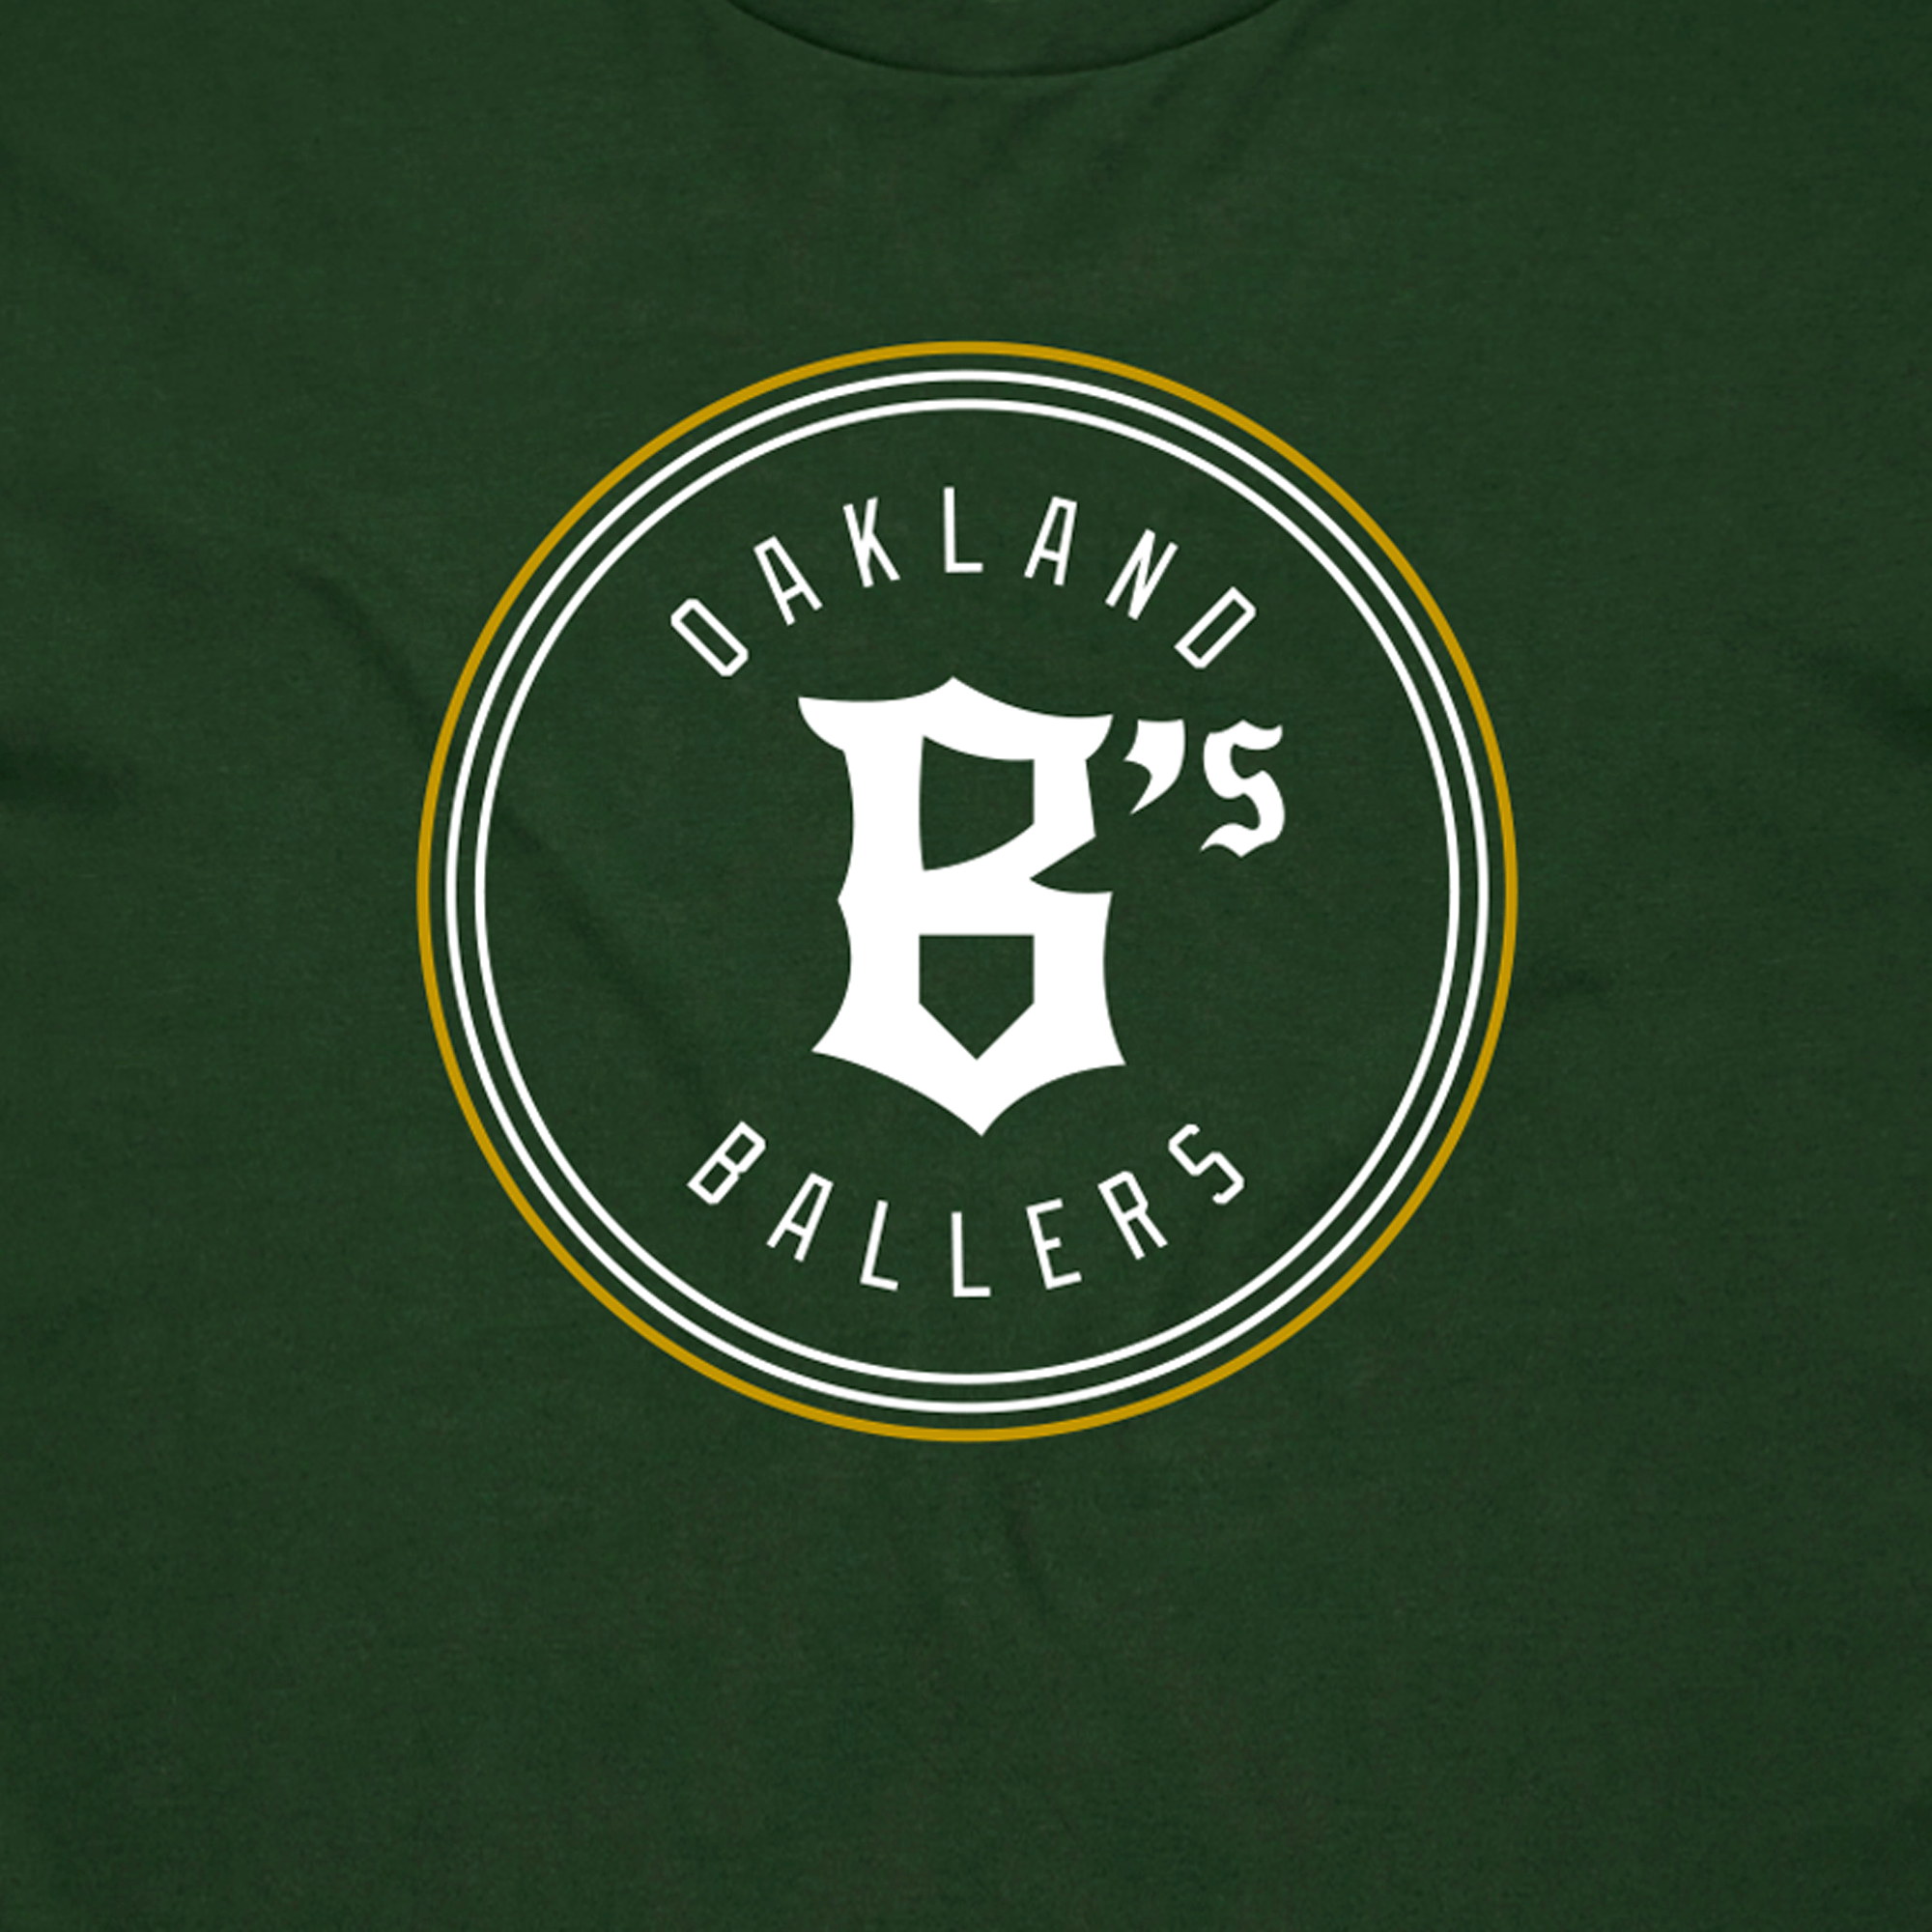 Close-up of the classic white and gold Oakland B's Ballers logo on the chest of a forest green t-shirt.